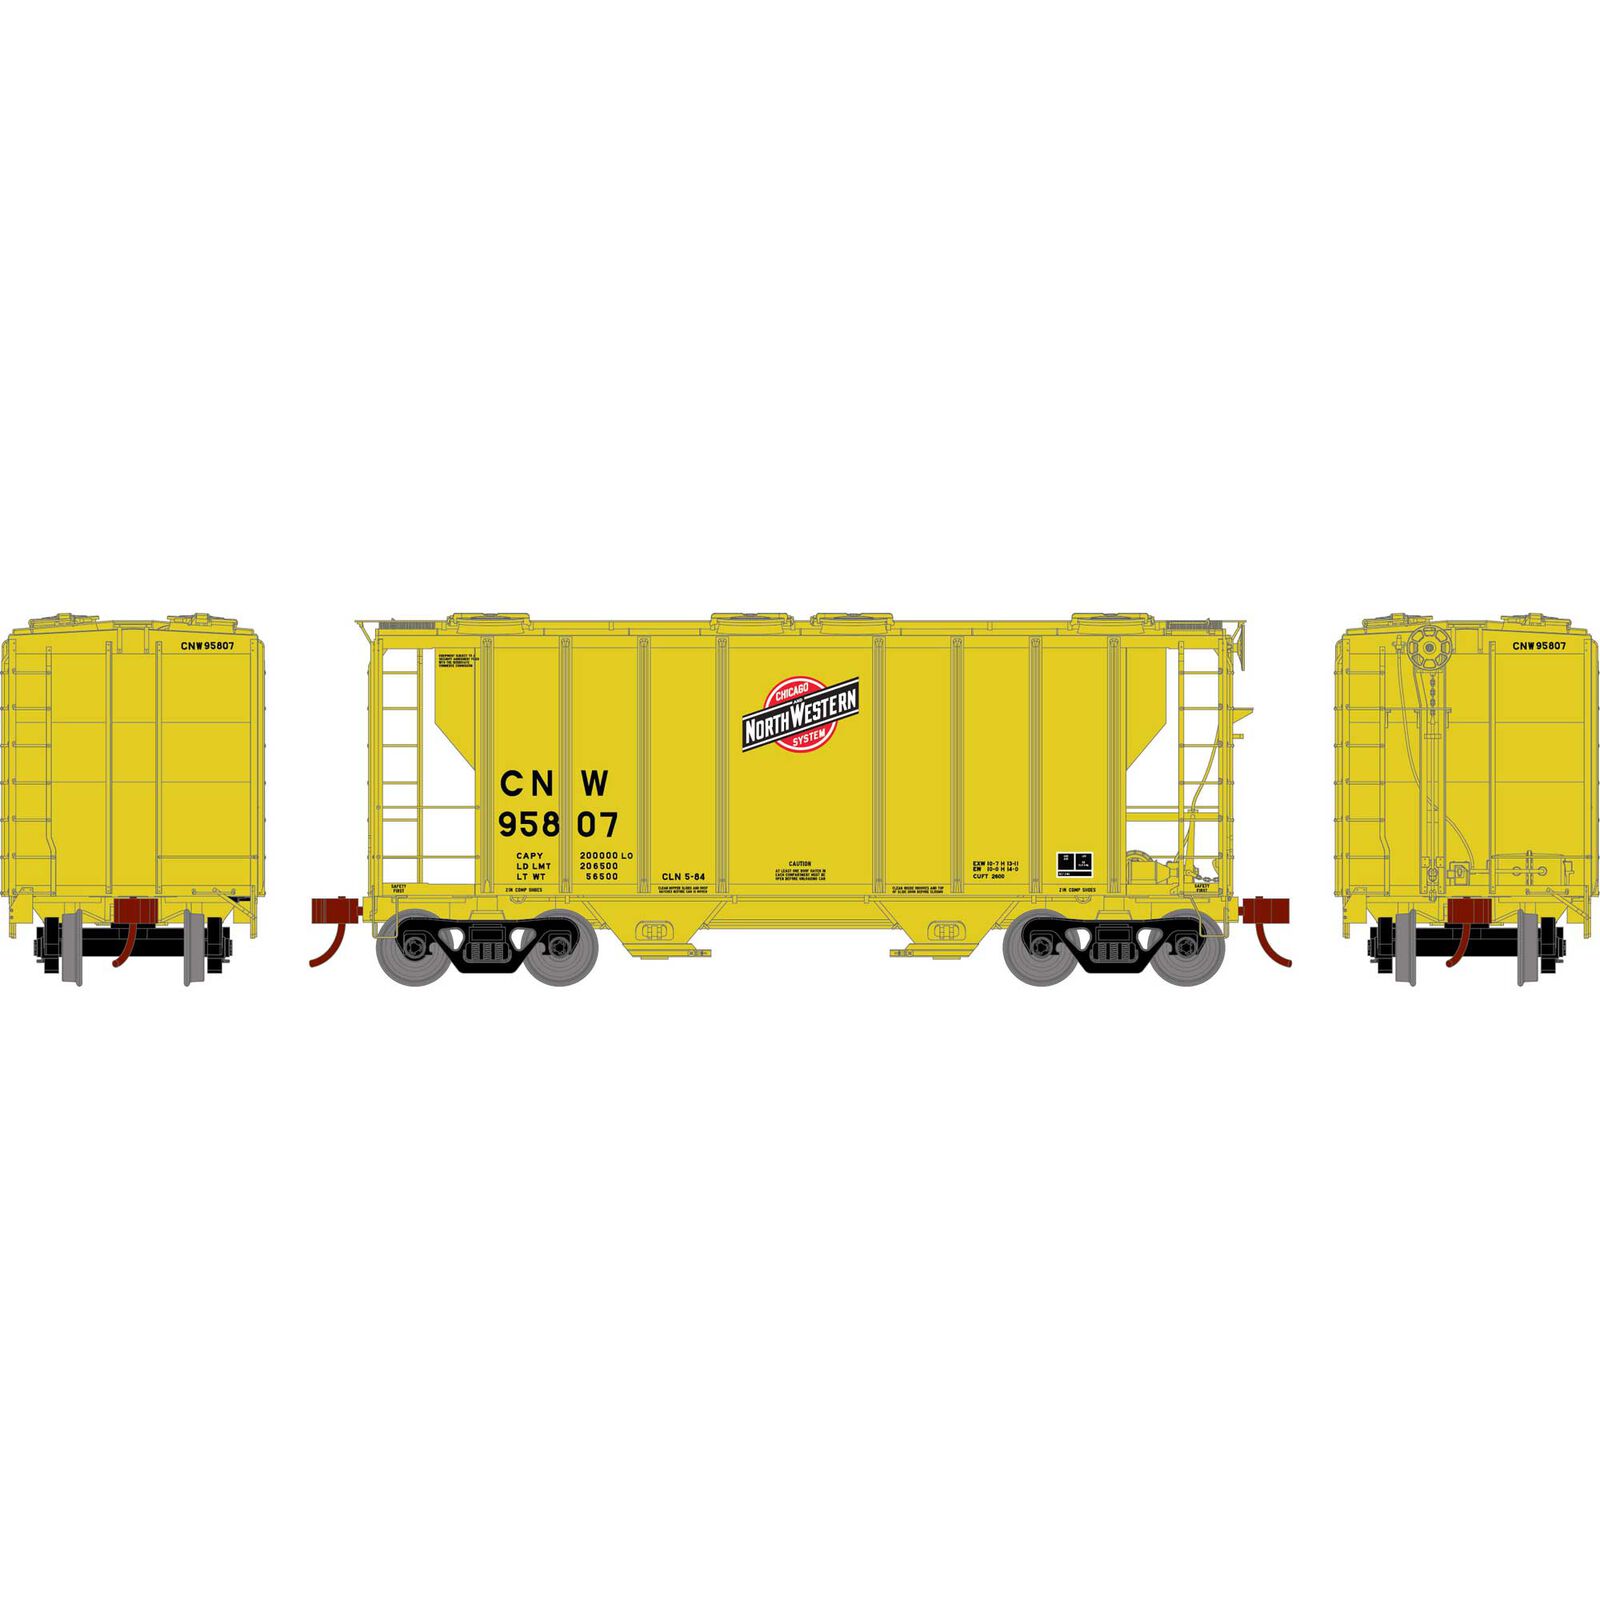 HO PS-2 2600 Covered Hopper, C&NW #95807